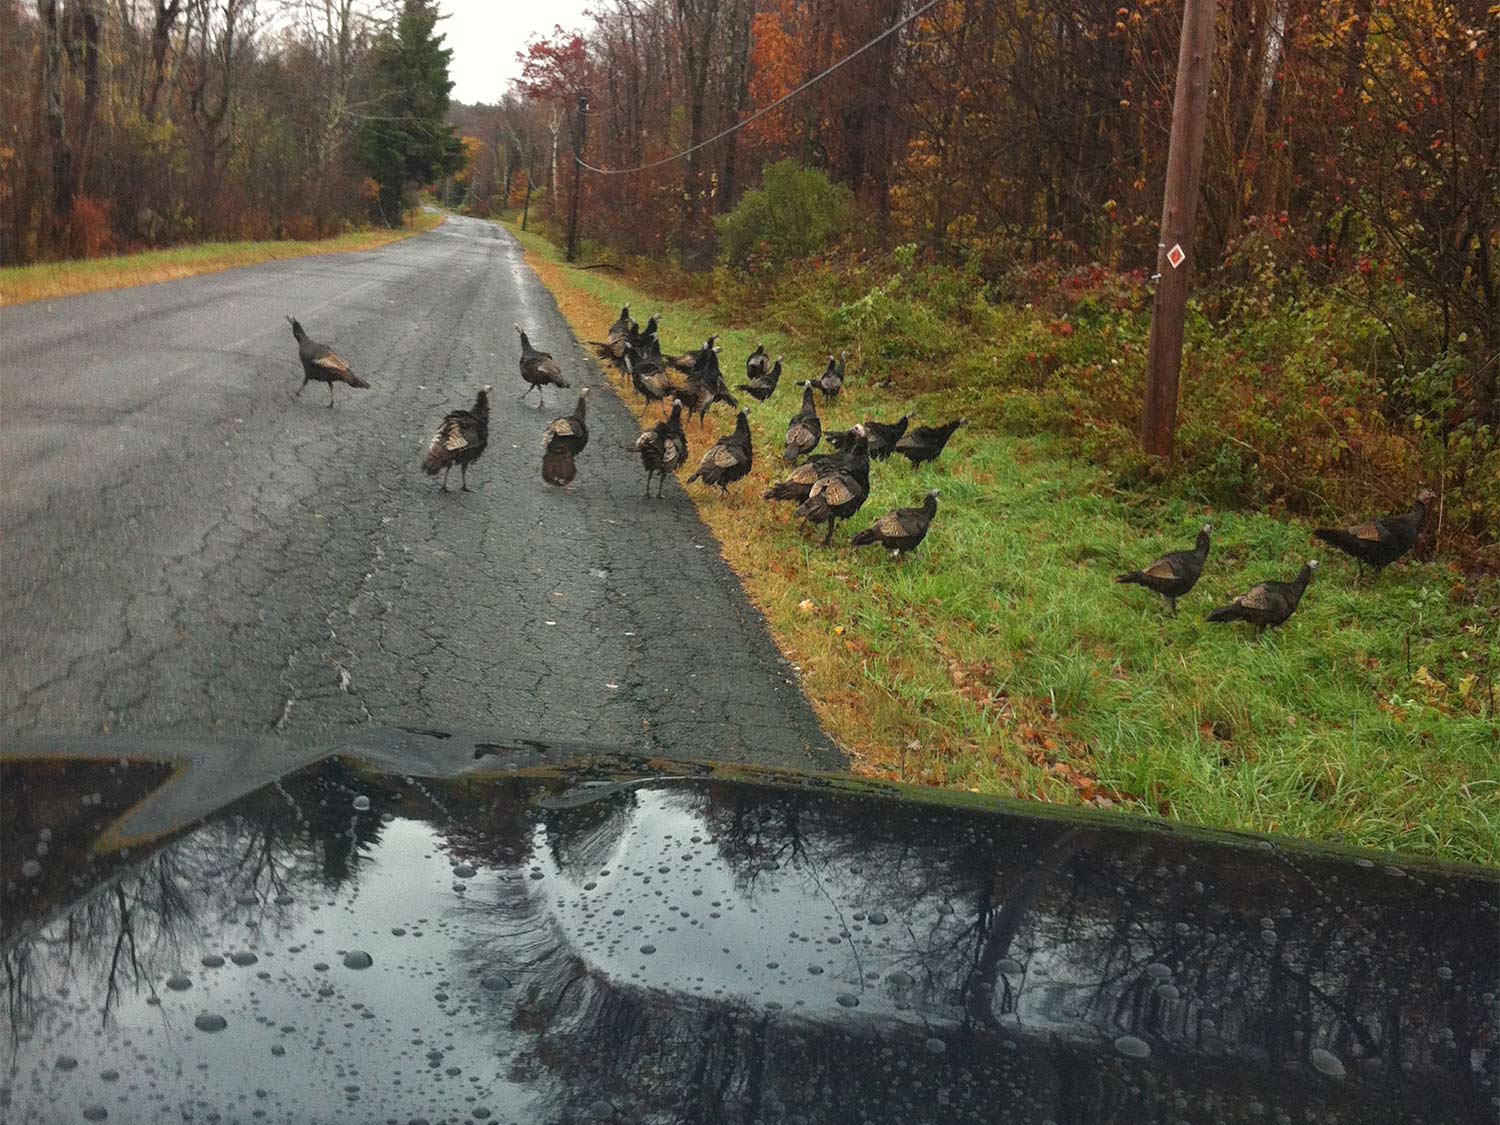 A flock of turkeys crossing a paved road.